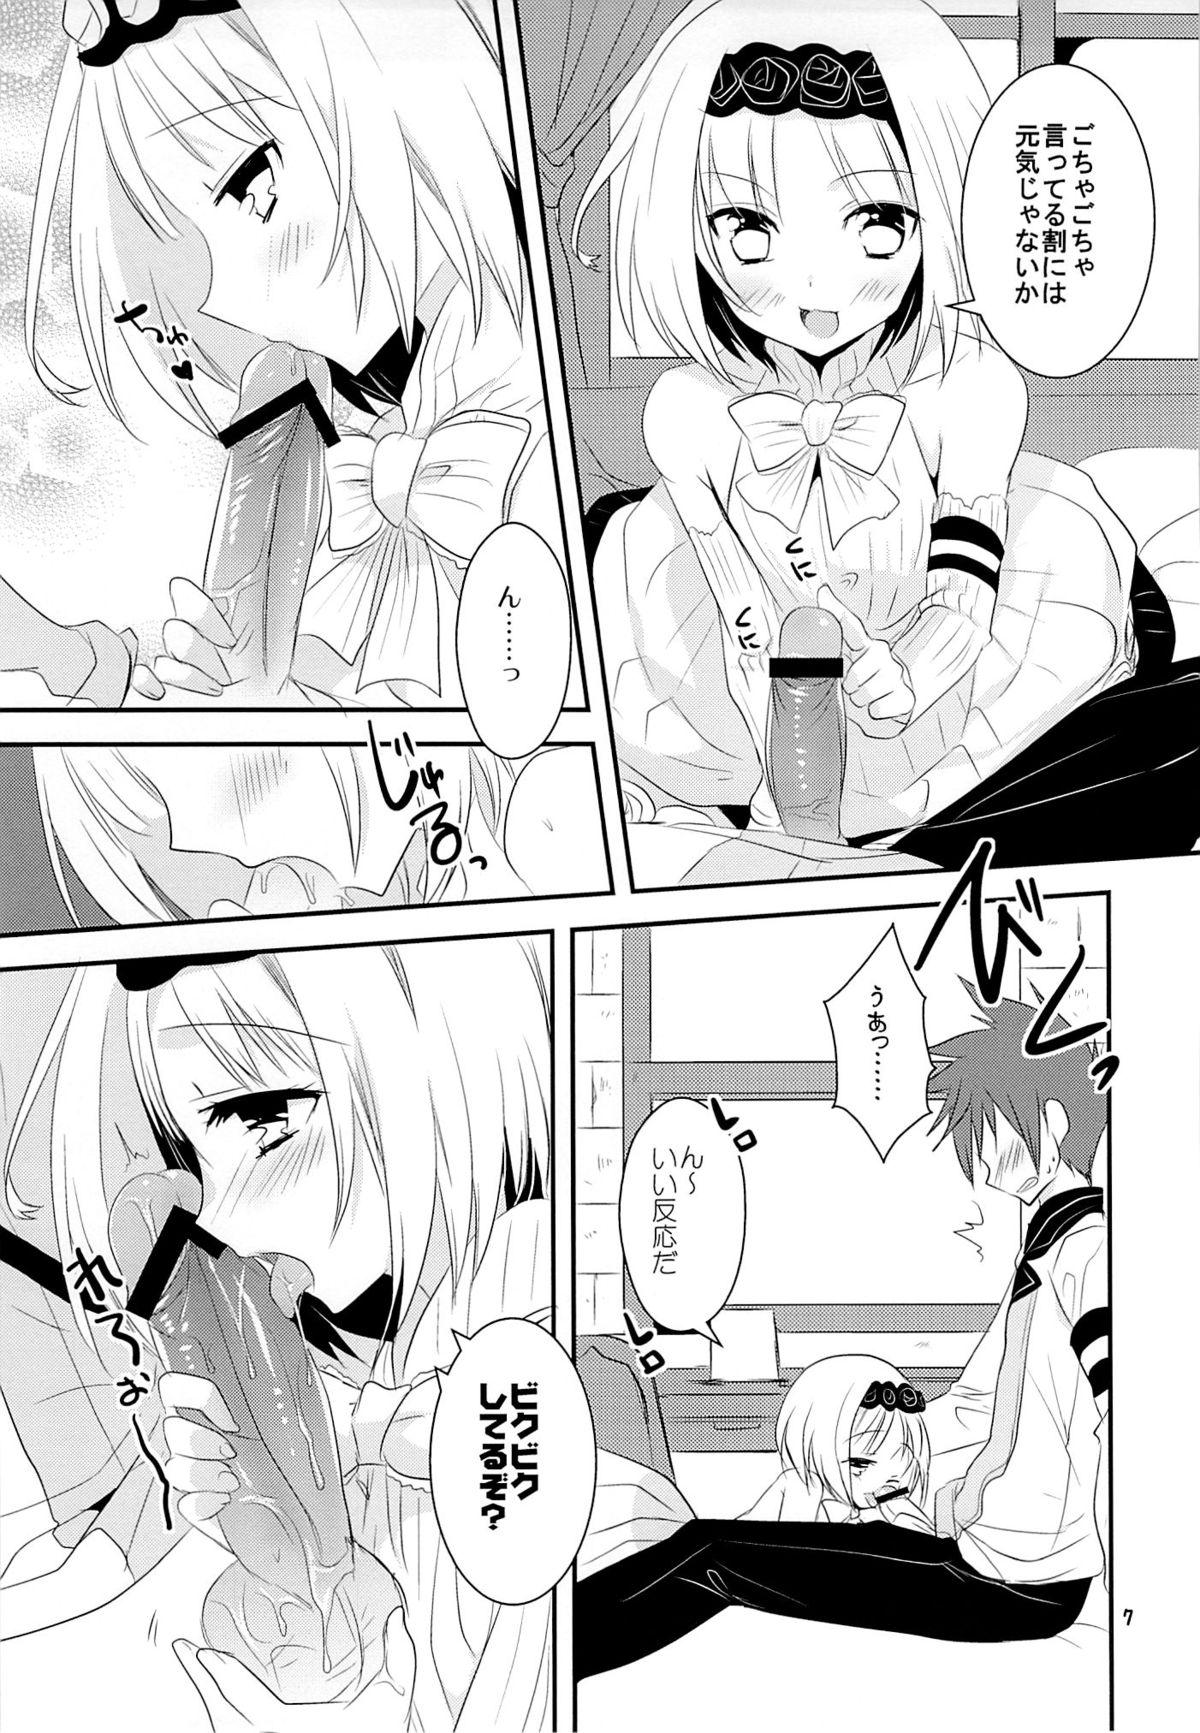 Shemales Ane Loli! - Summon night Brother Sister - Page 6